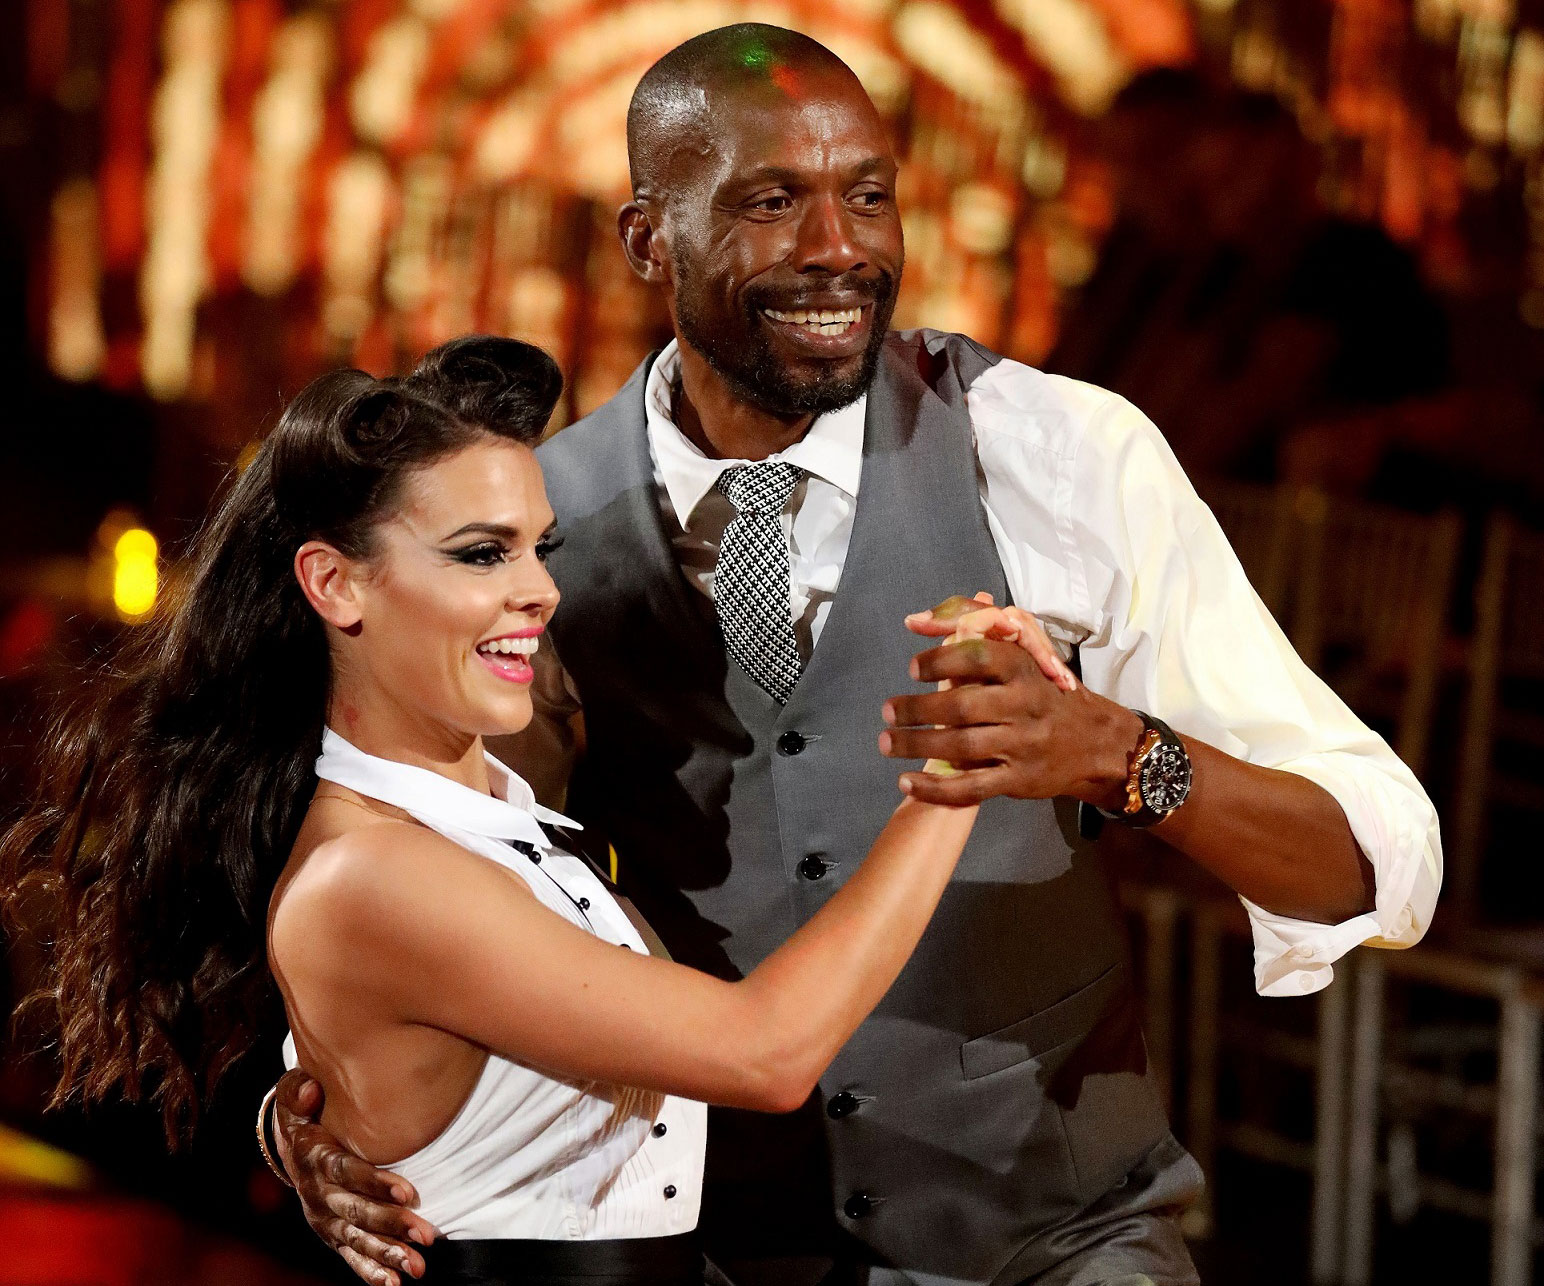 Sir Curtly Ambrose: “Australia saw another side of me on DWTS”